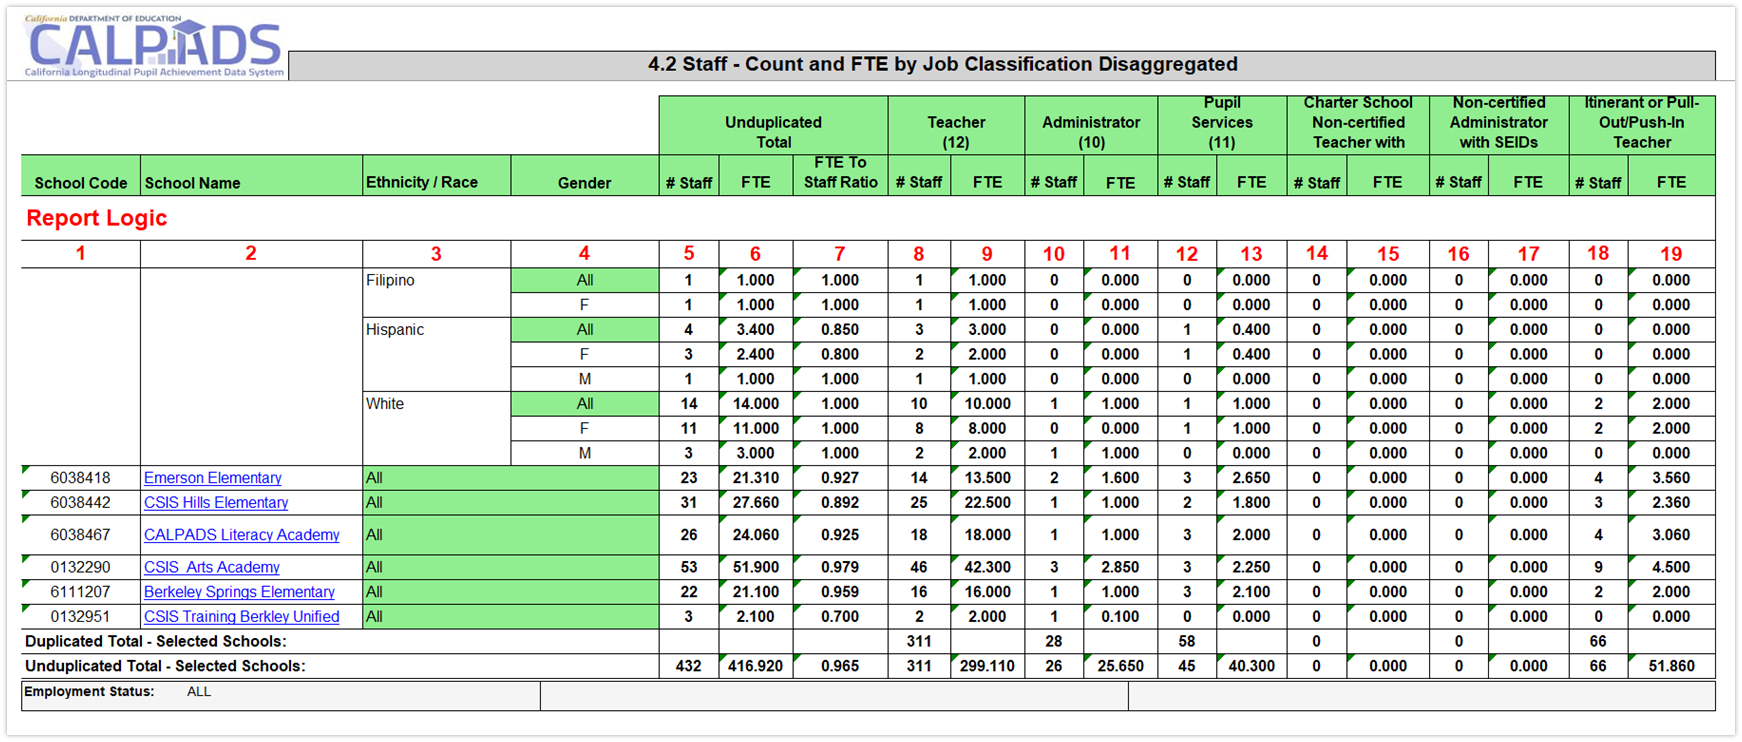 Report 4.2:  Staff - Count and FTE by Job Classification Disaggregated